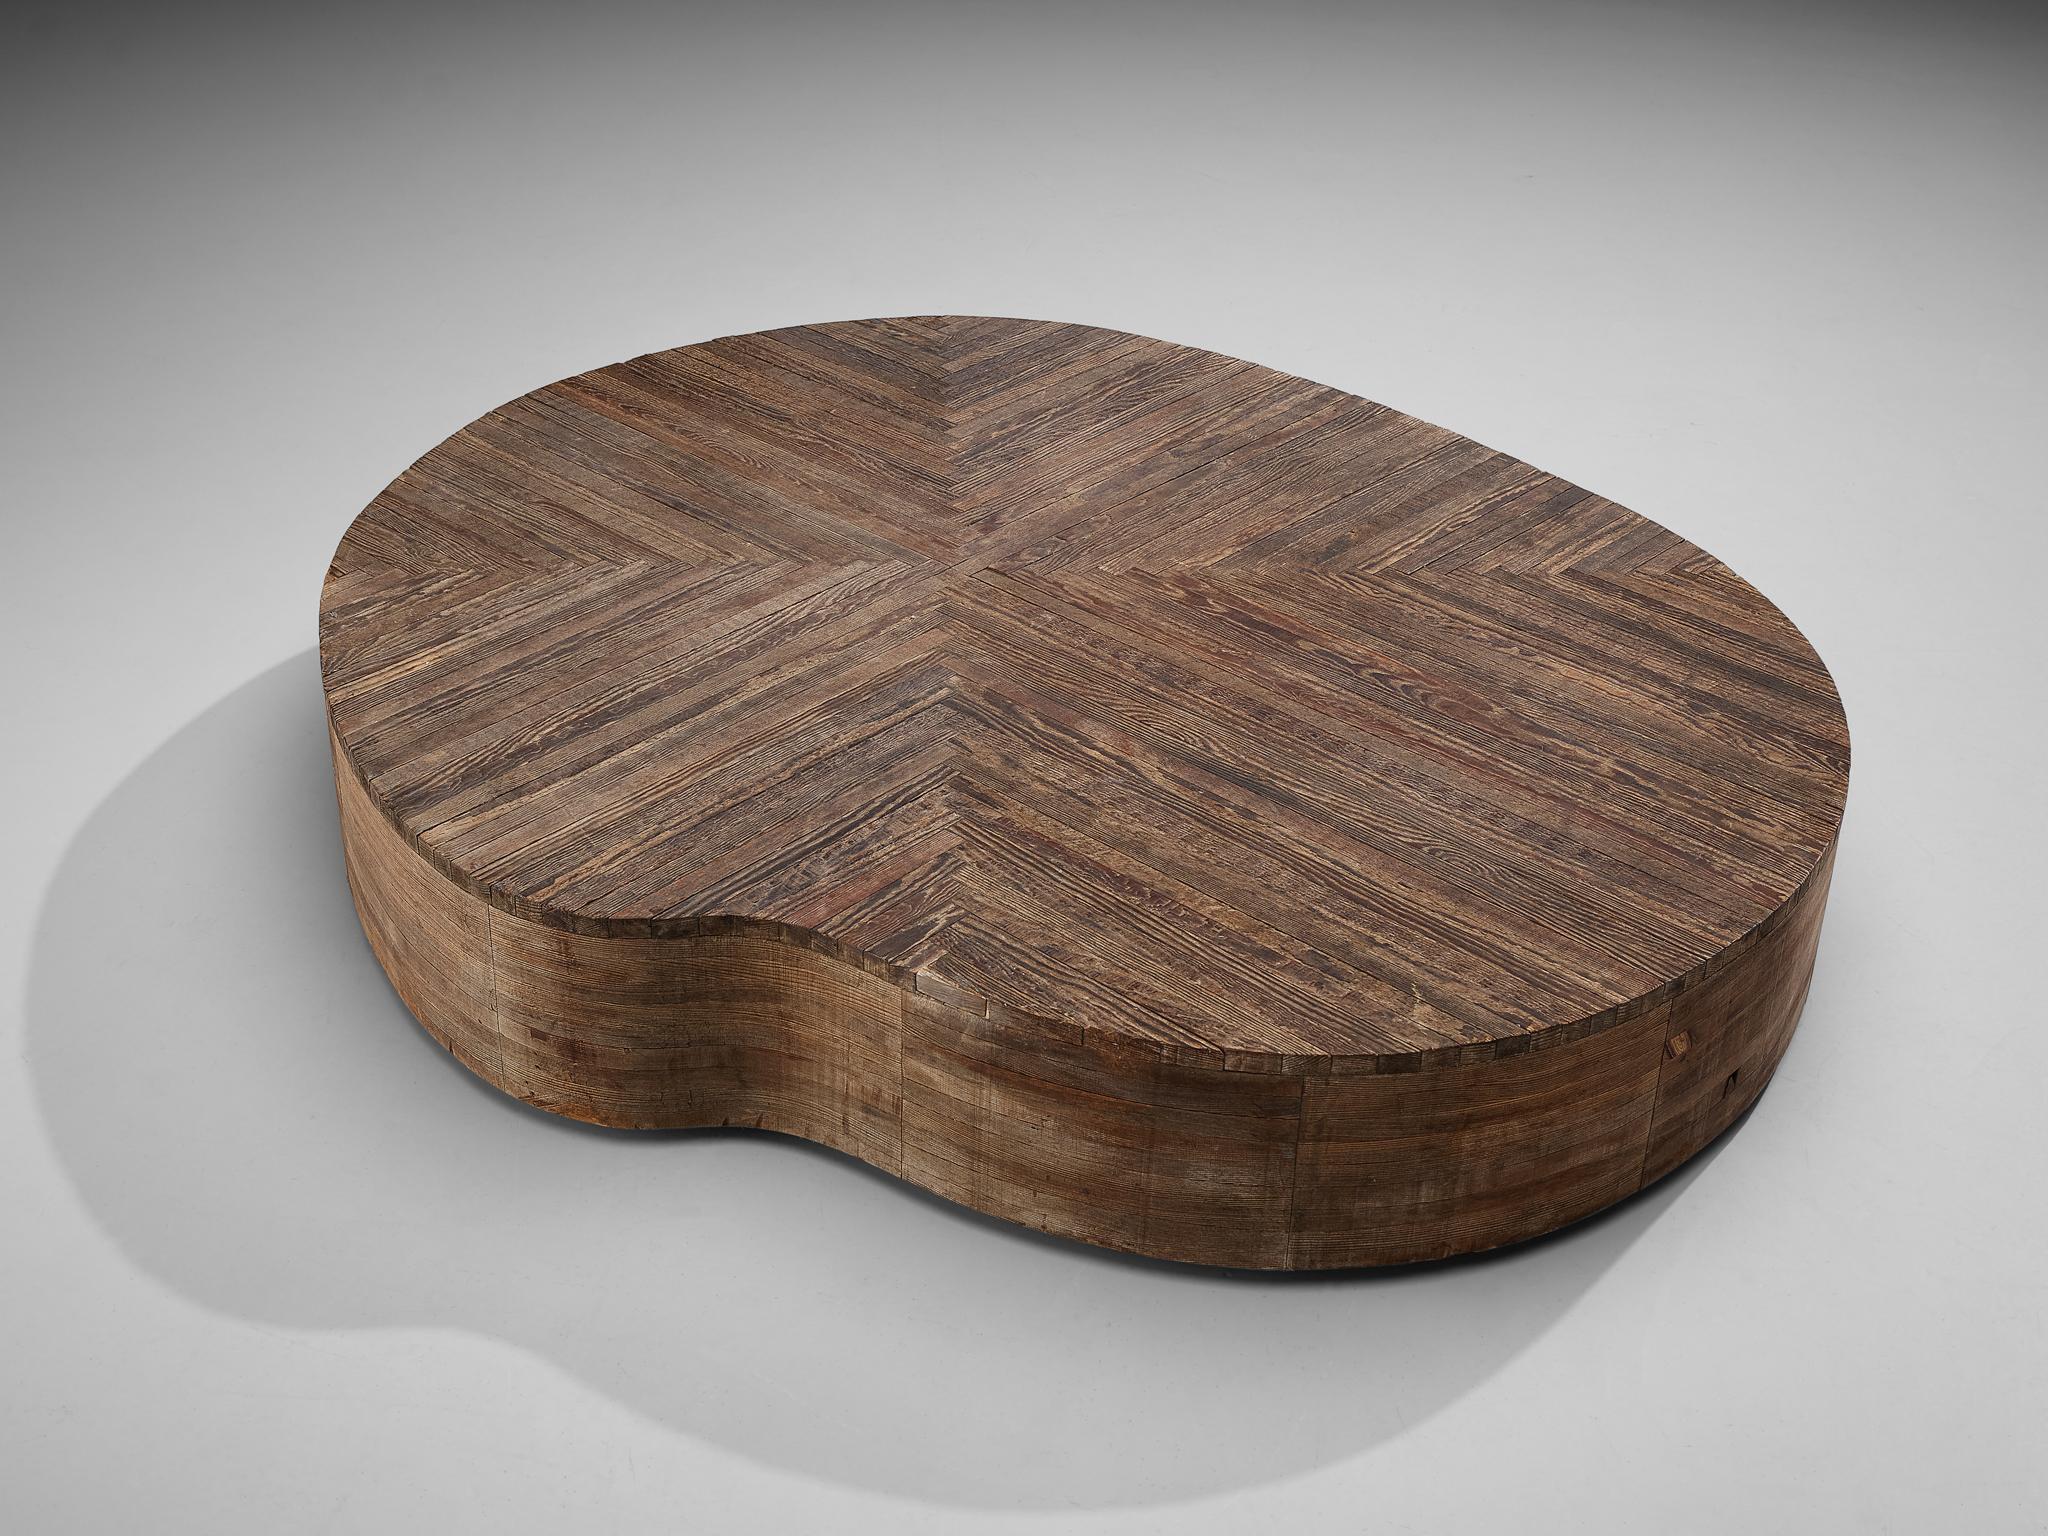 Mario Ceroli for Poltronova, coffee table, pine, Italy, 1970s

Stunning freeform coffee table in pine-wood by Italian designer Mario Ceroli for Poltronova. This low coffee table shows not only a great, round shape but also a beautiful top with pine